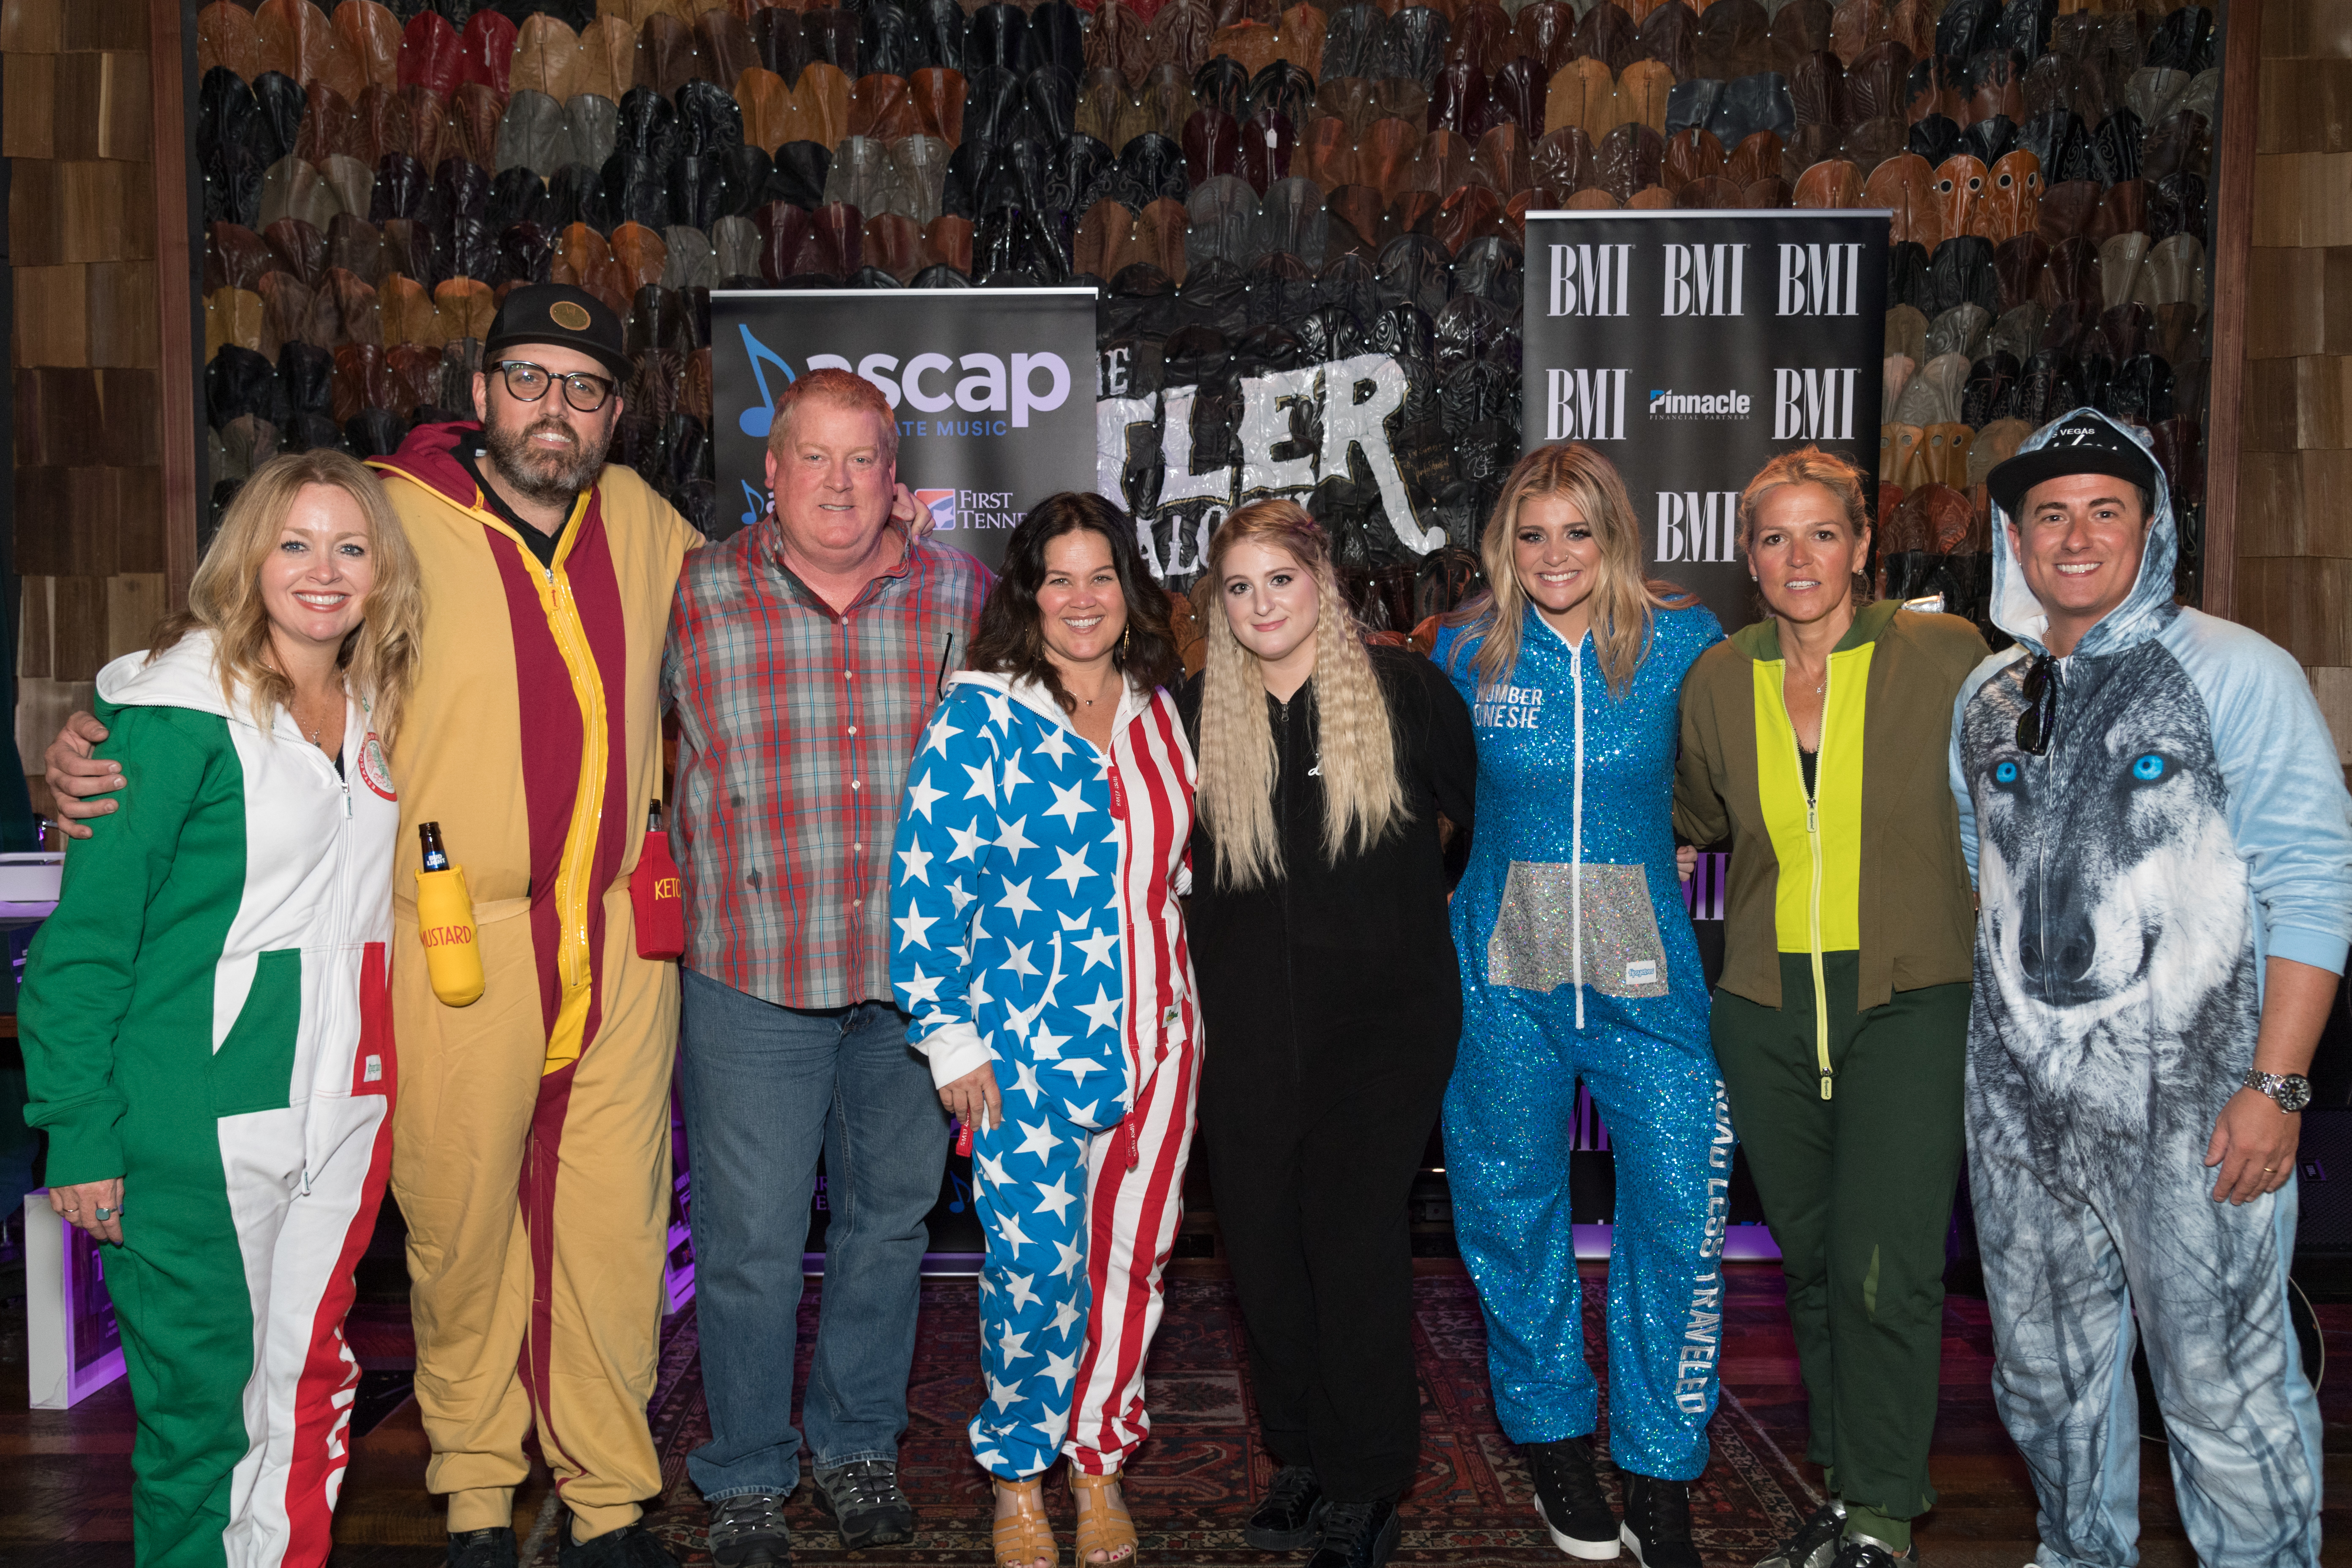 Pictured: (L-R): Warner Chappell's Alicia Pruitt, producer busbee, ASCAP's Mike Sistad, Big Yellow Dog's Carla Wallace, ASCAP writer Meghan Trainor, BMI singer-songwriter Lauren Alaina, BMI's Leslie Roberts and BMI writer Jesse Frasure; Photo by Steve Lowry